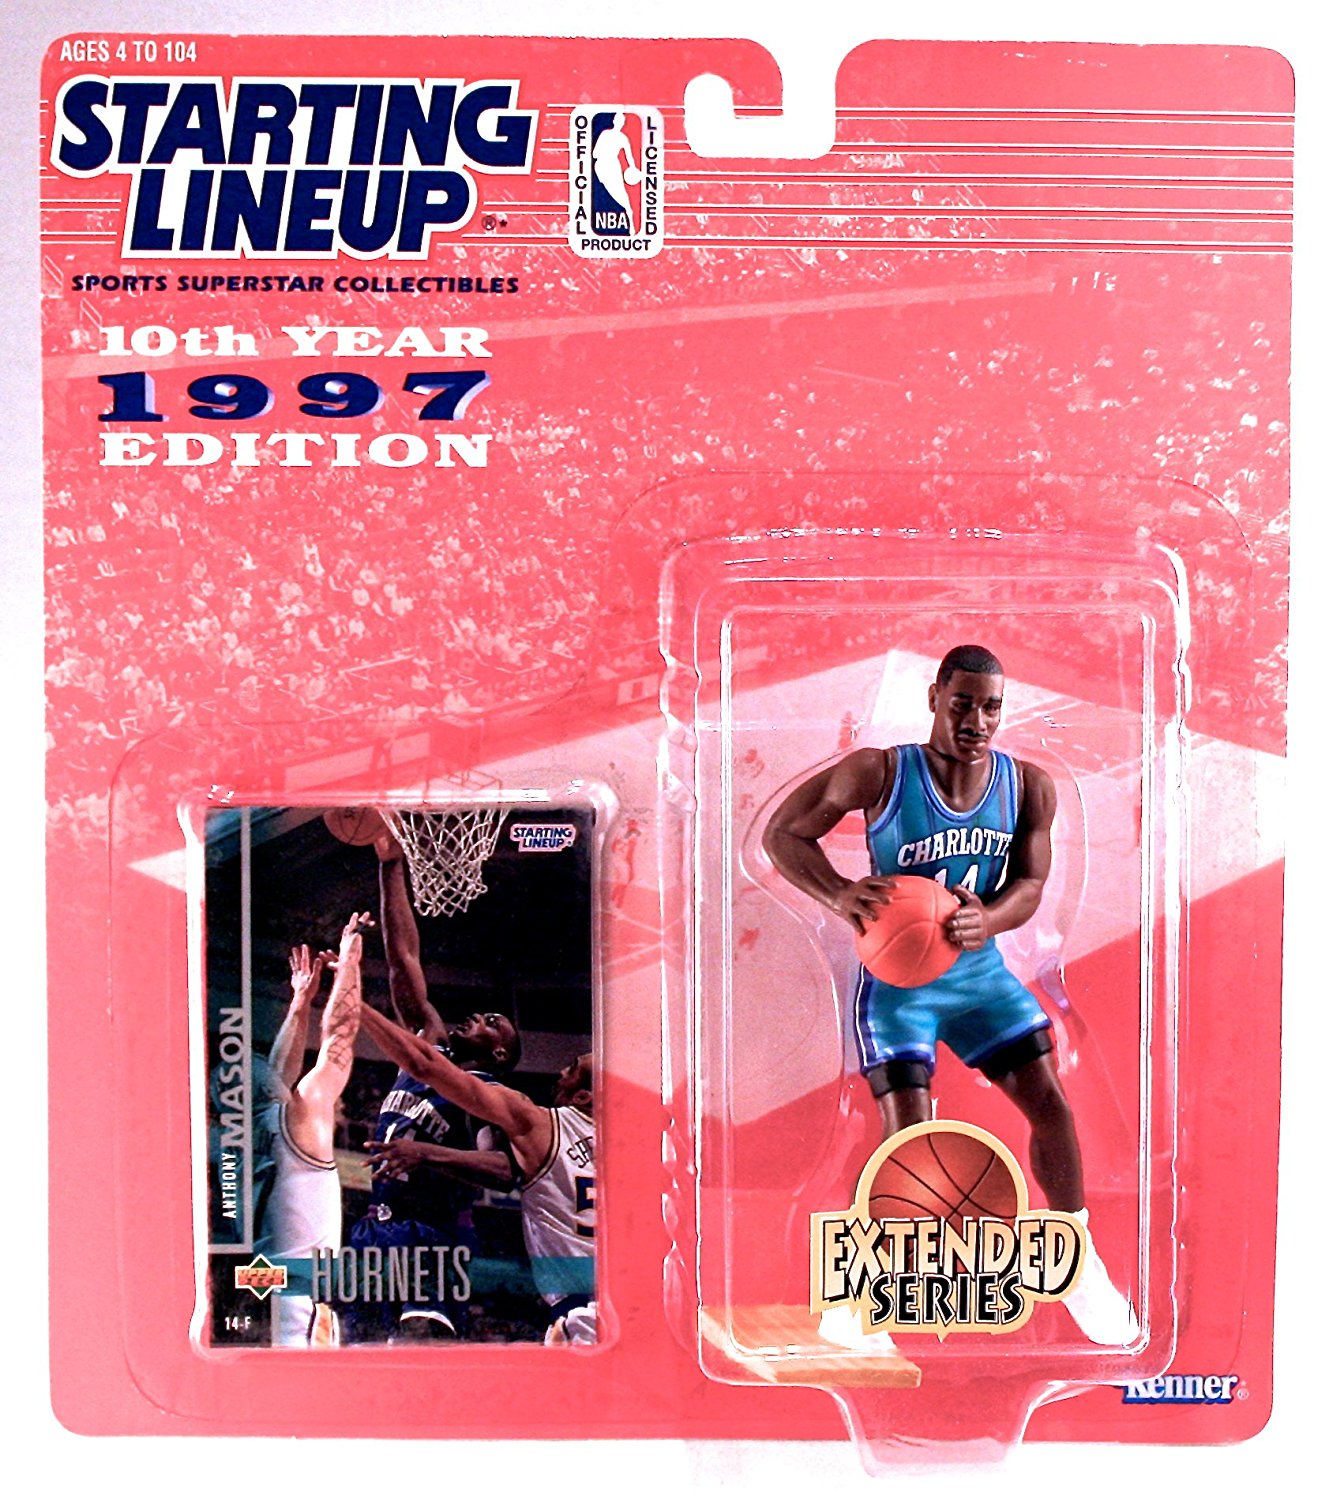 ANTHONY MASON / CHARLOTTE HORNETS * 1997 EXTENDED SERIES * NBA Starting Lineup Action Figure & Exclusive NBA Collector Trading Card